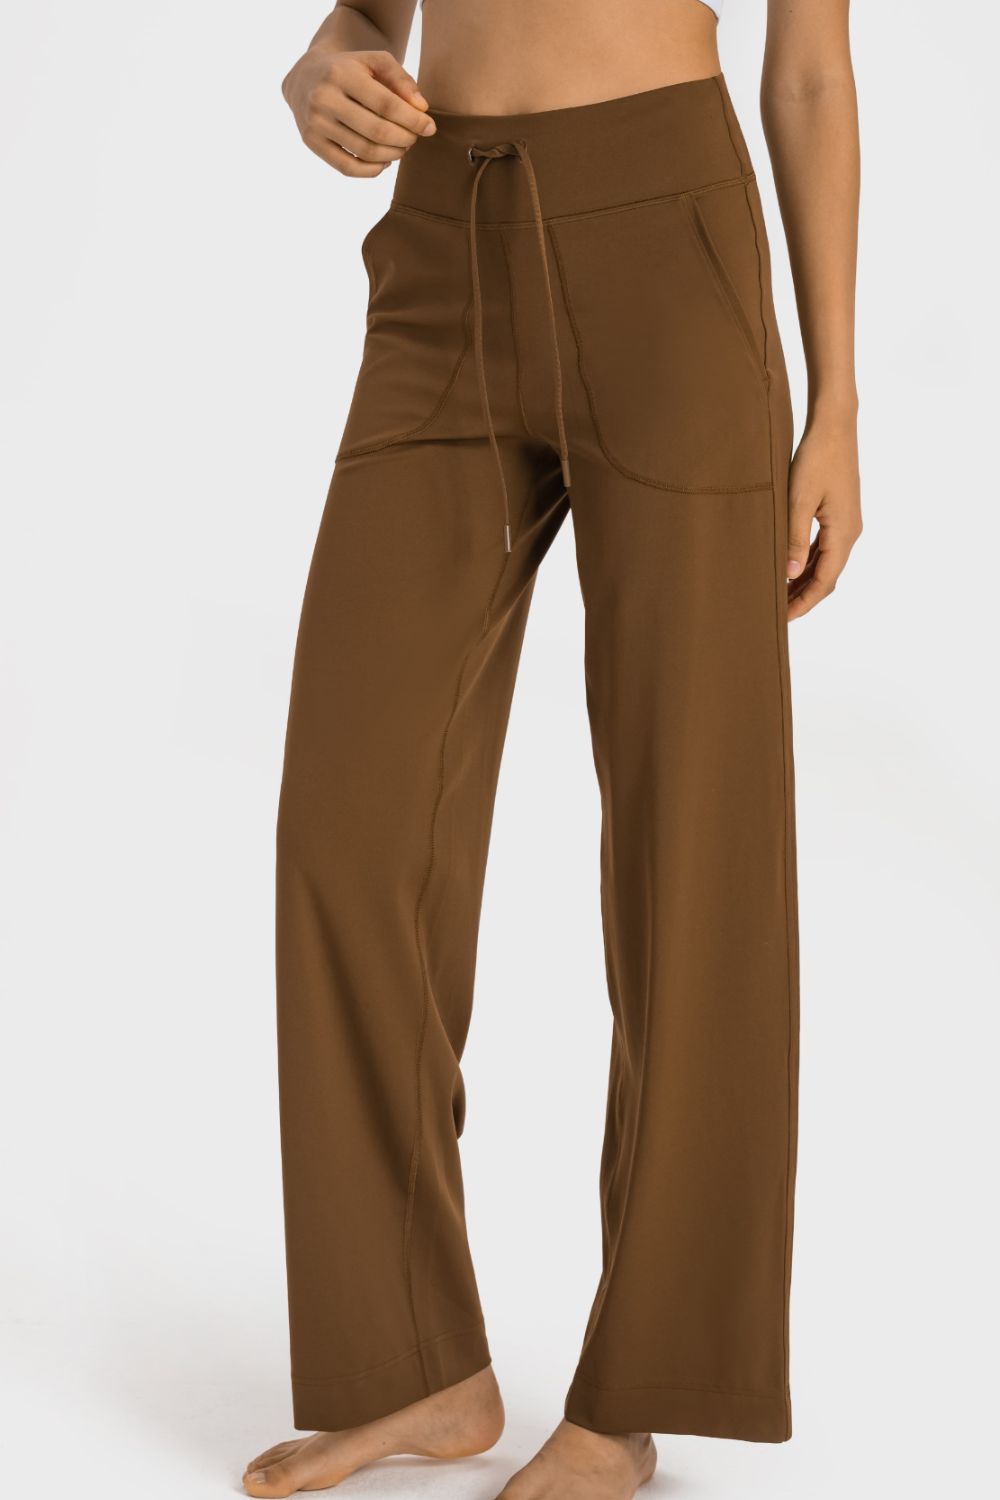 Saddle Brown Drawstring Waist Wide Leg Sports Pants with Pockets activewear